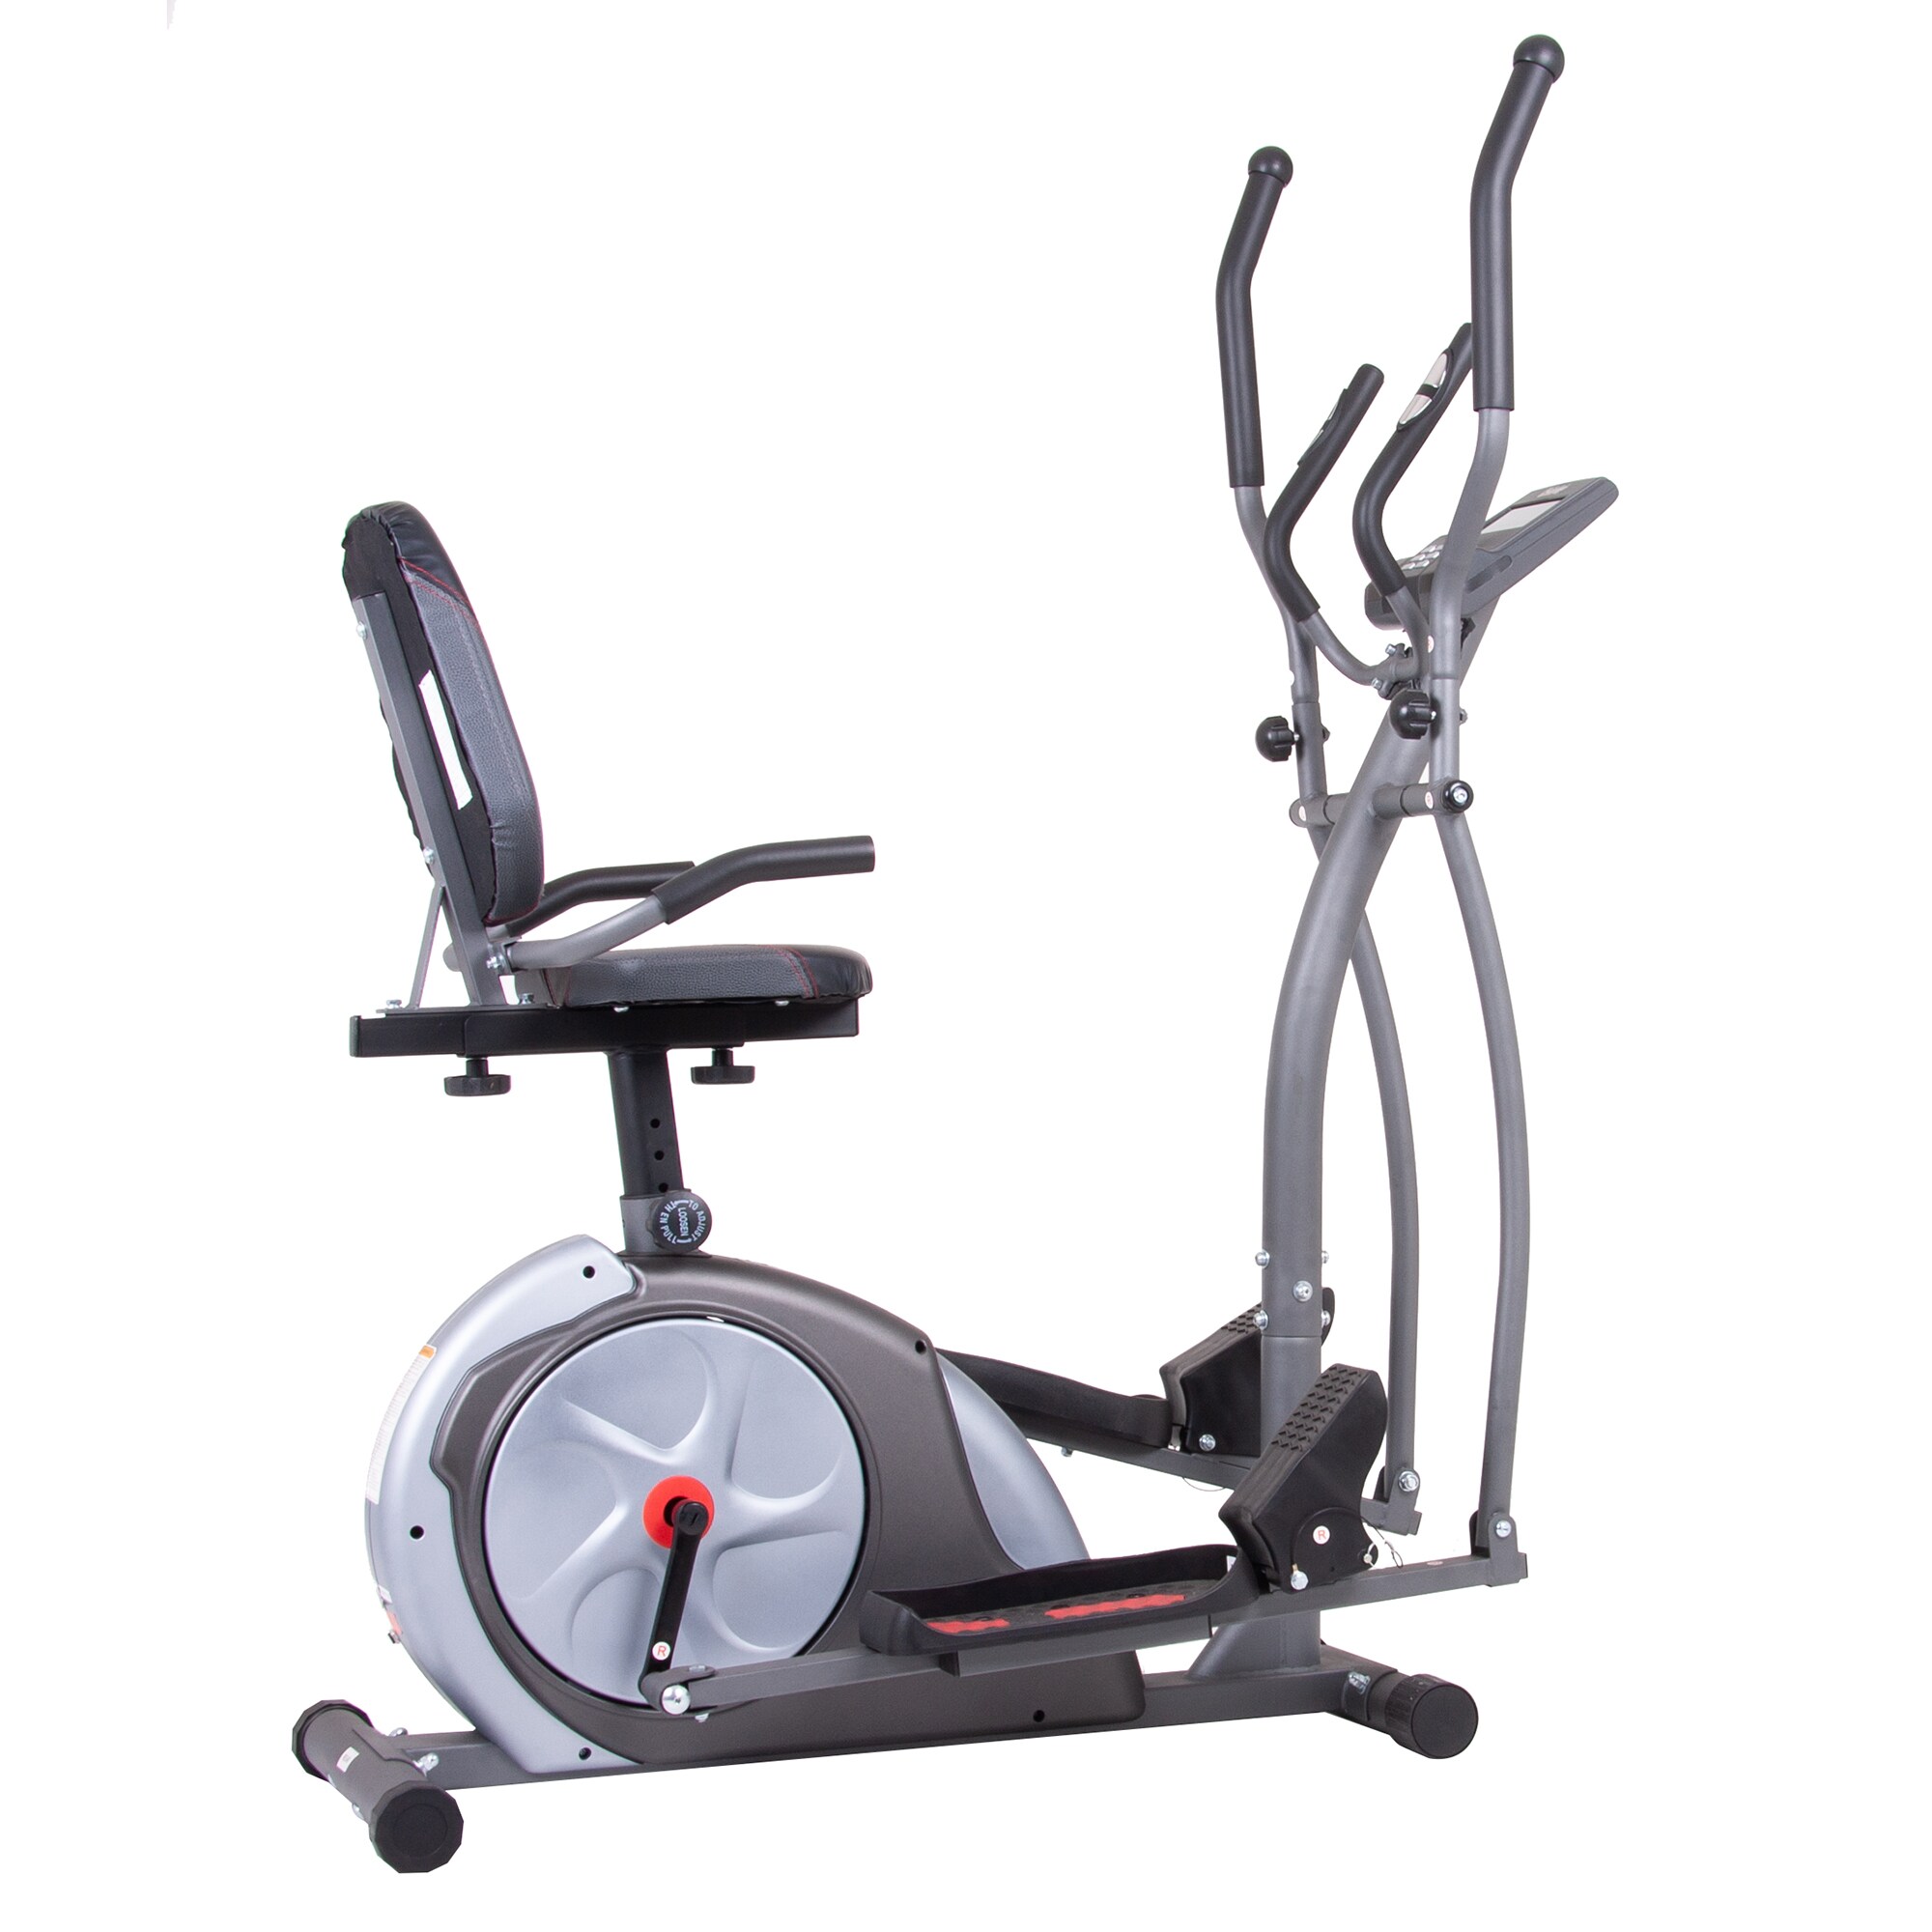 Body Rider Exercise Upright Fan Bike Stationary Fi... with UPDATED Softer Seat 